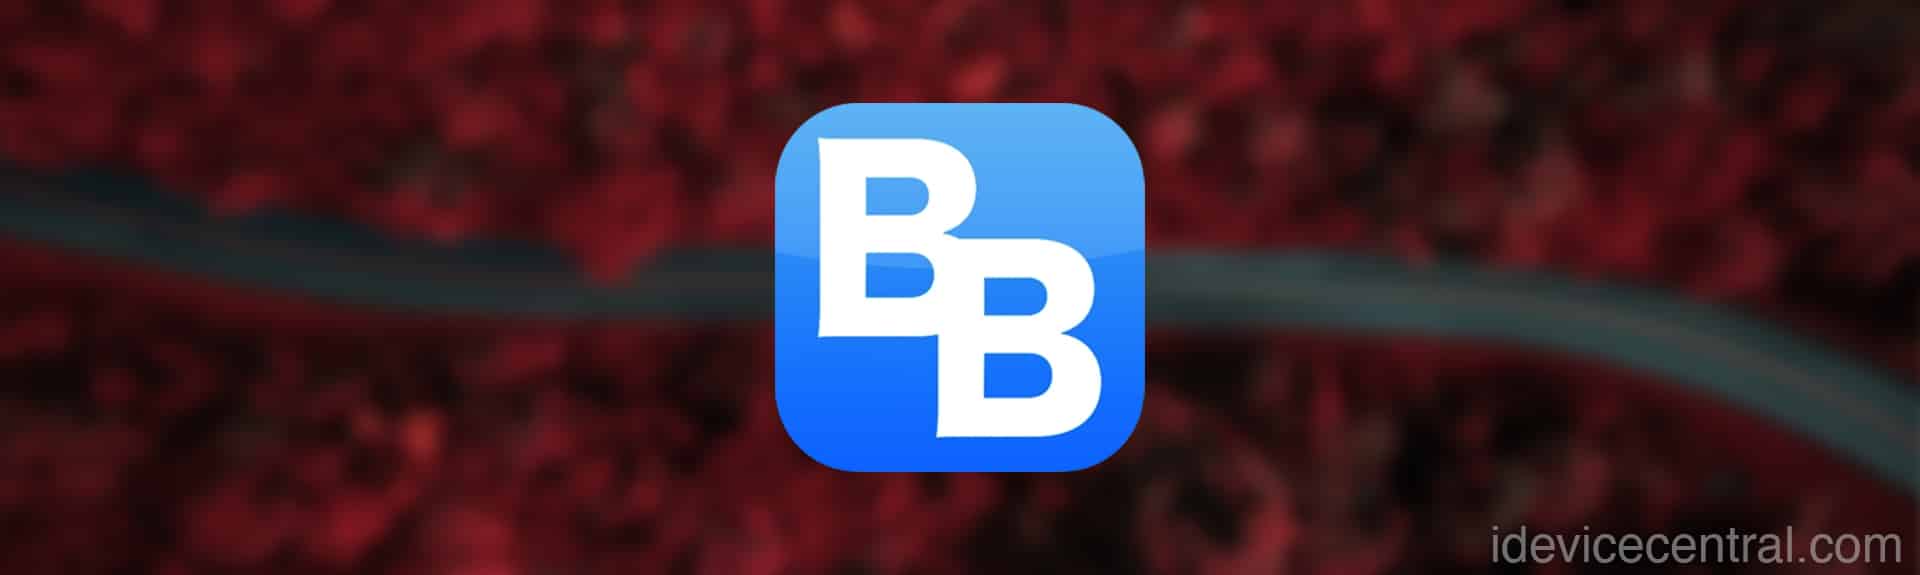 Add BigBoss Repository to Cydia, Sileo, Zebra, or Installer 5 With One Tap